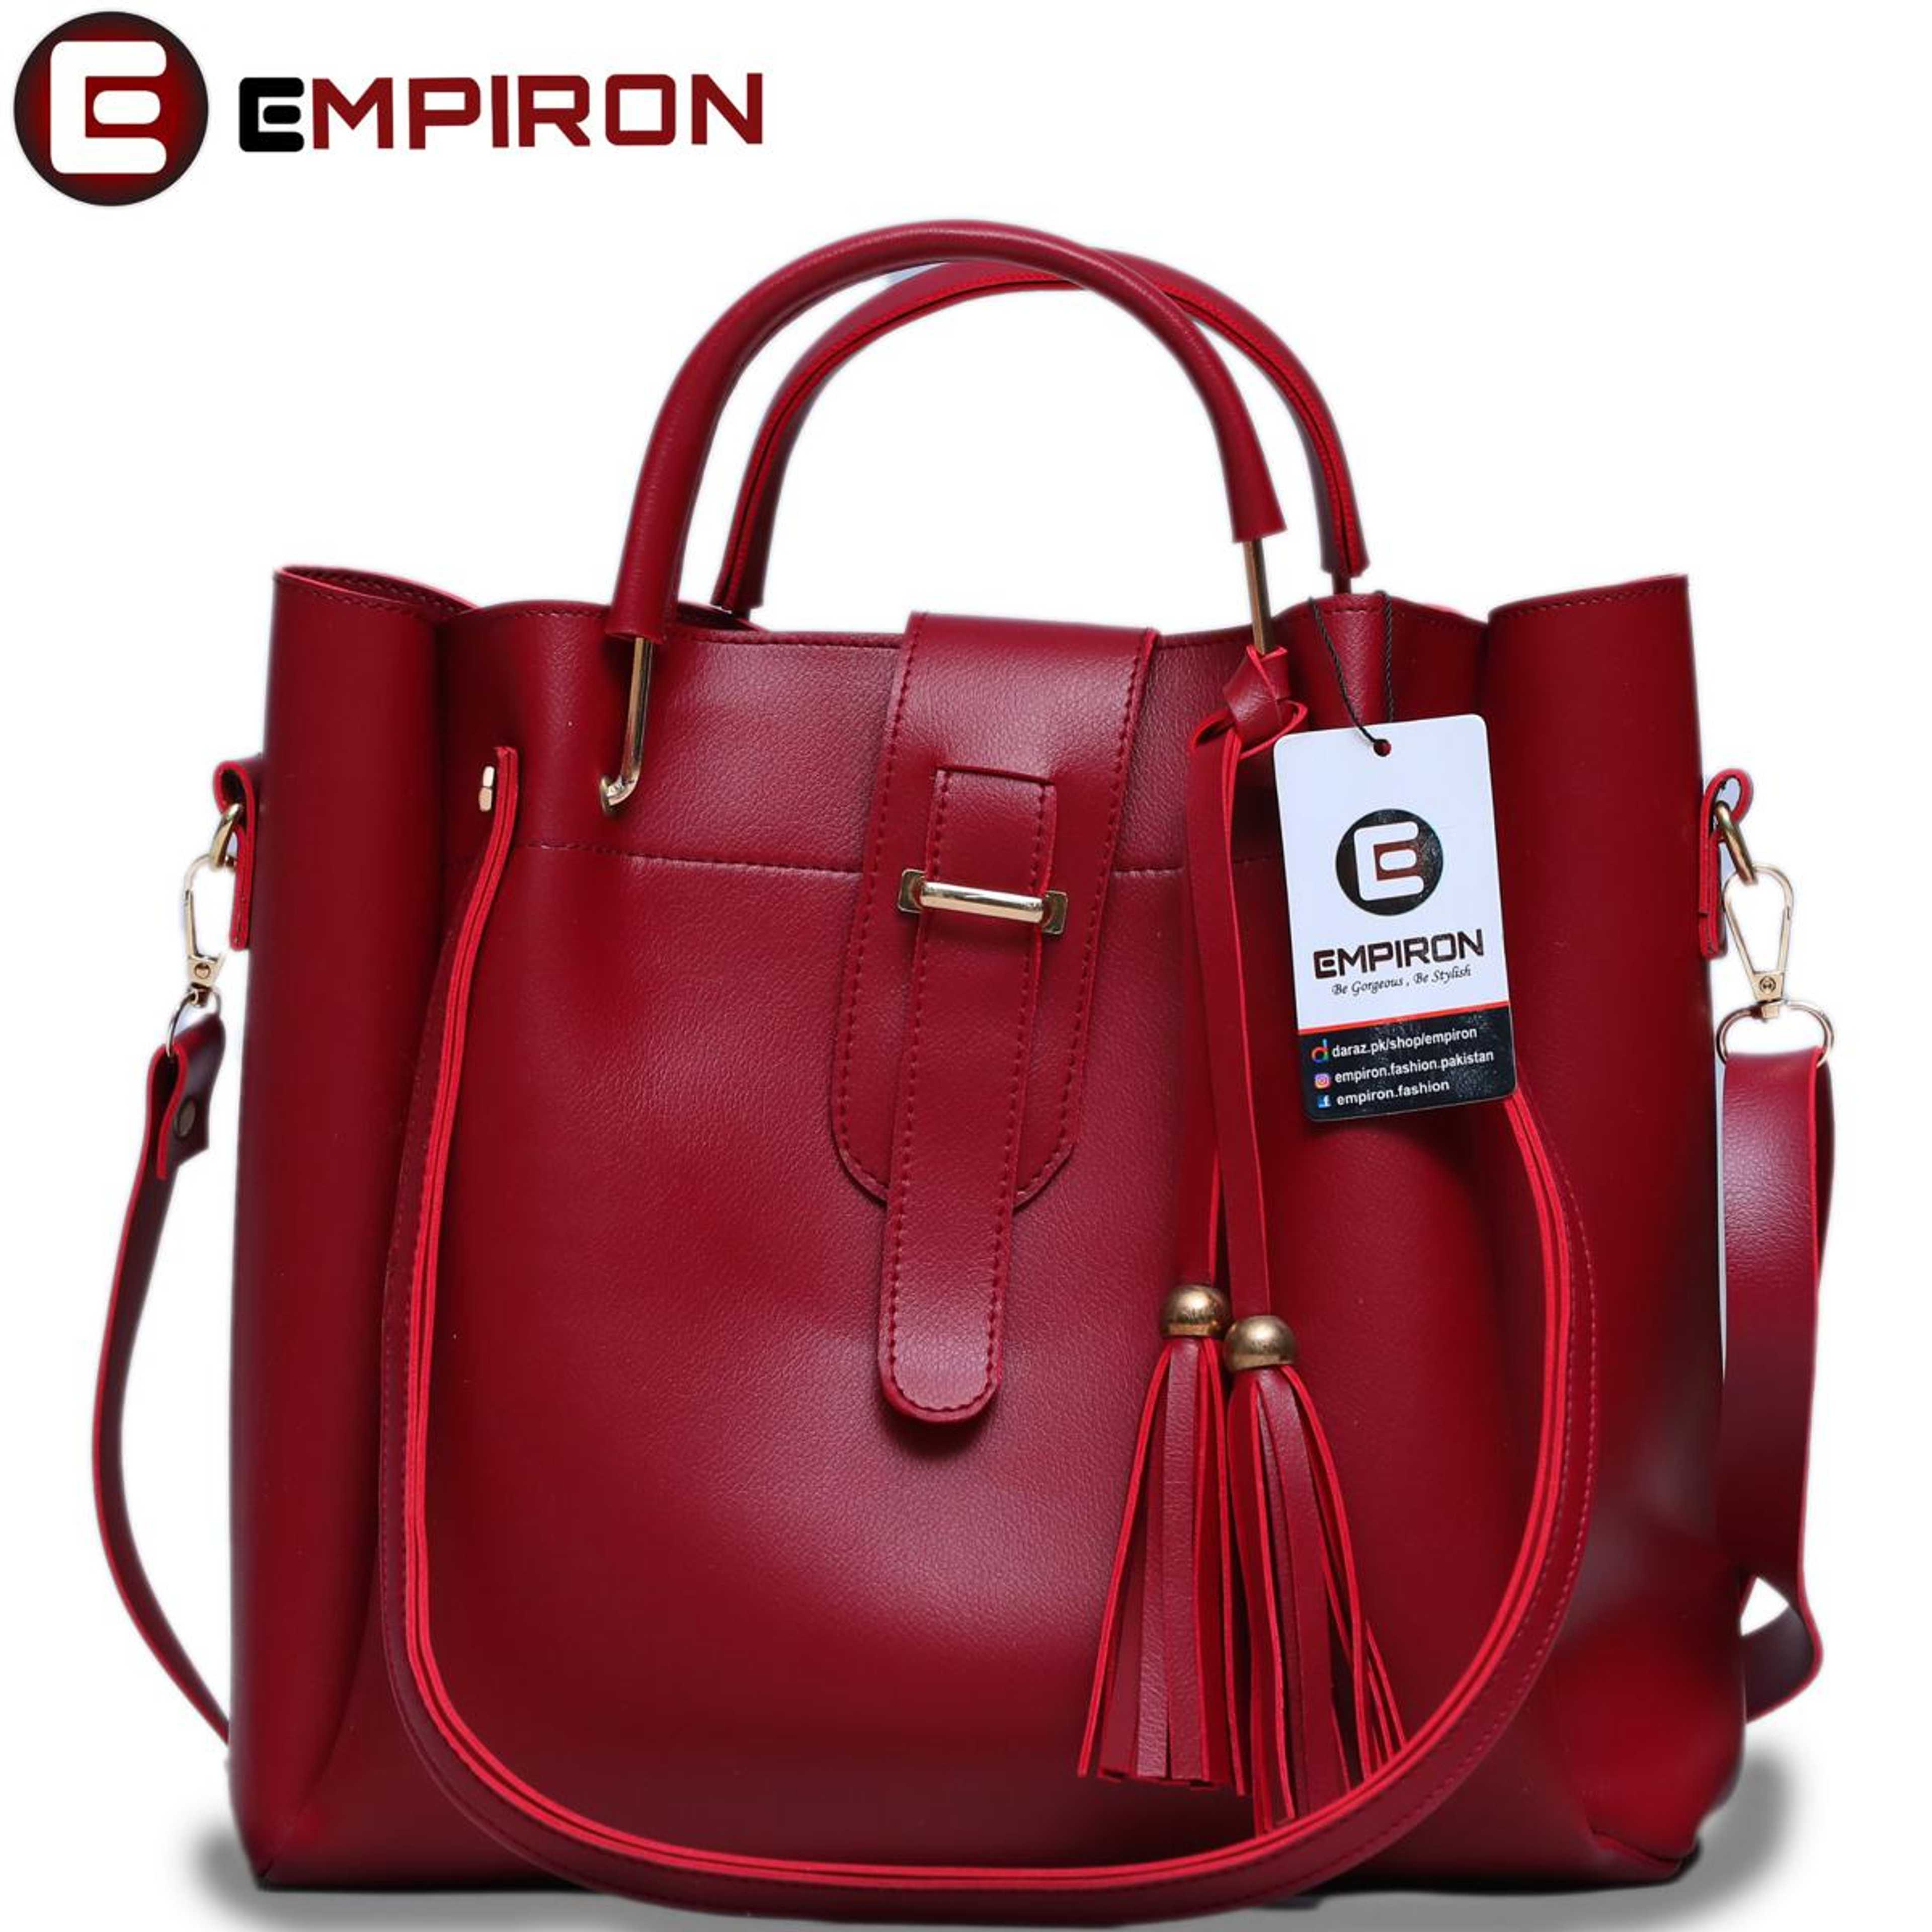 Empiron Luxury Hand bag for Woman and girls